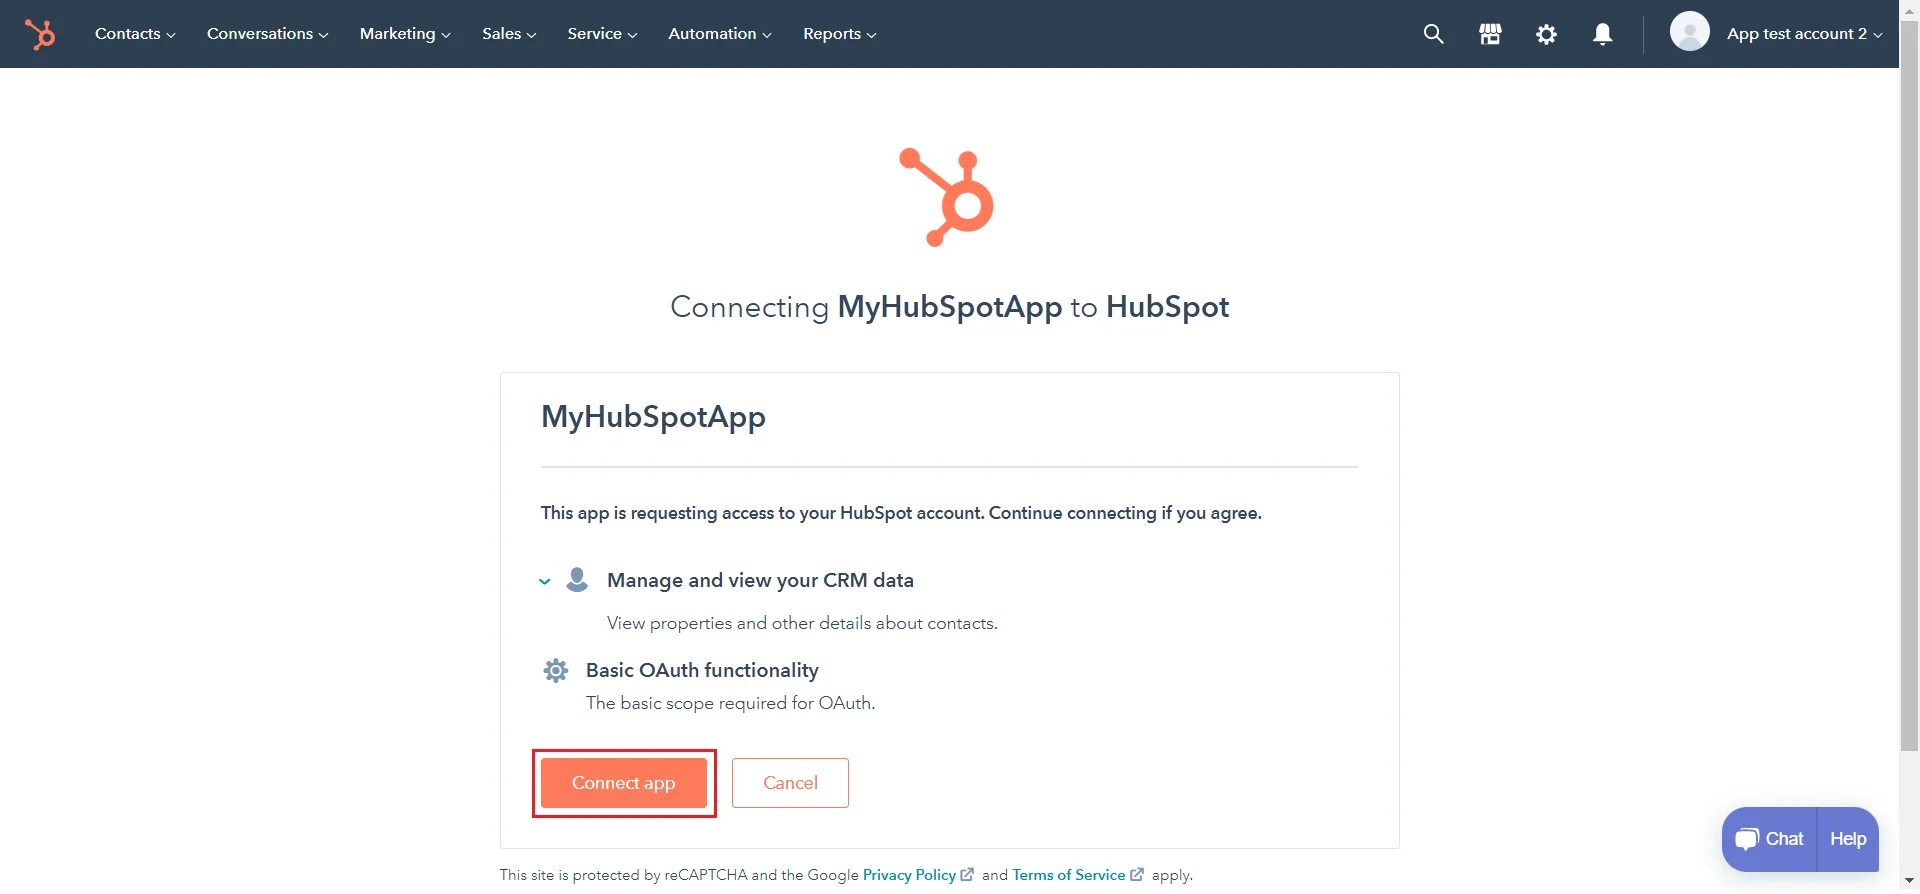 Enable Hubspot Single Sign-On(SSO)  Login using AWS Cognito as Identity Provider
  